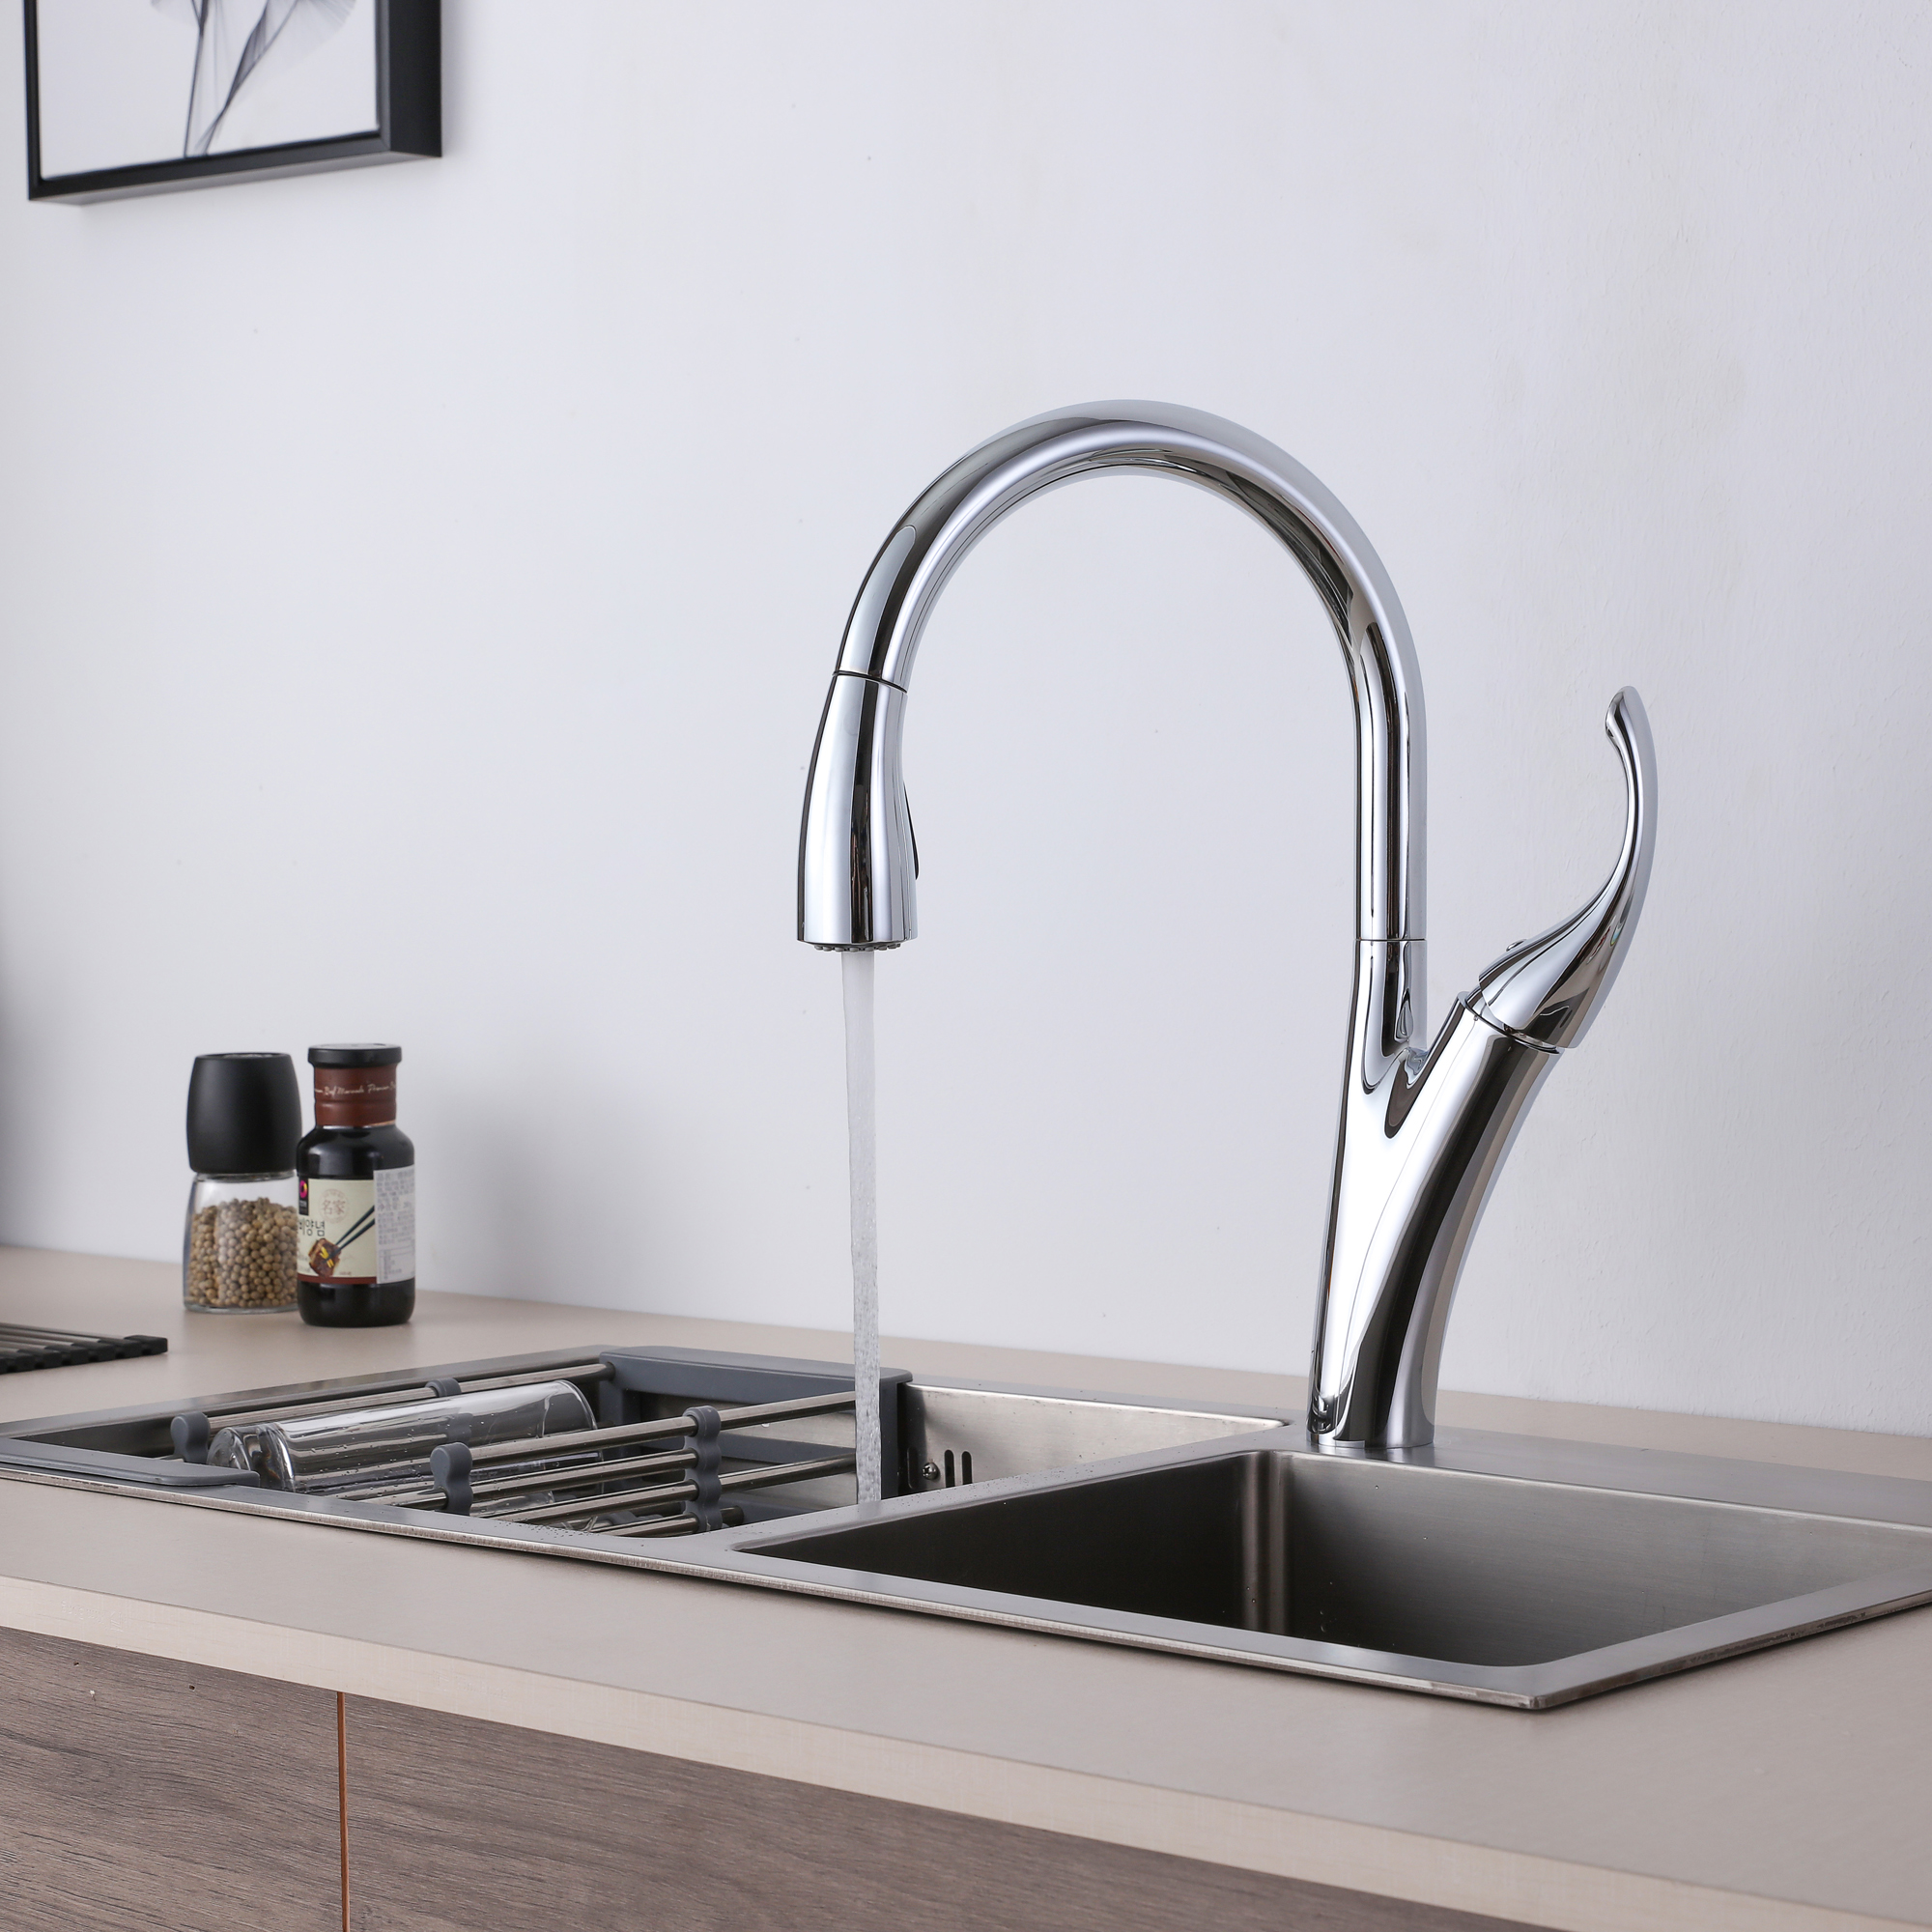 Originality Style Pull Down Zinc Stainless Steel Kitchen Mixer Faucet